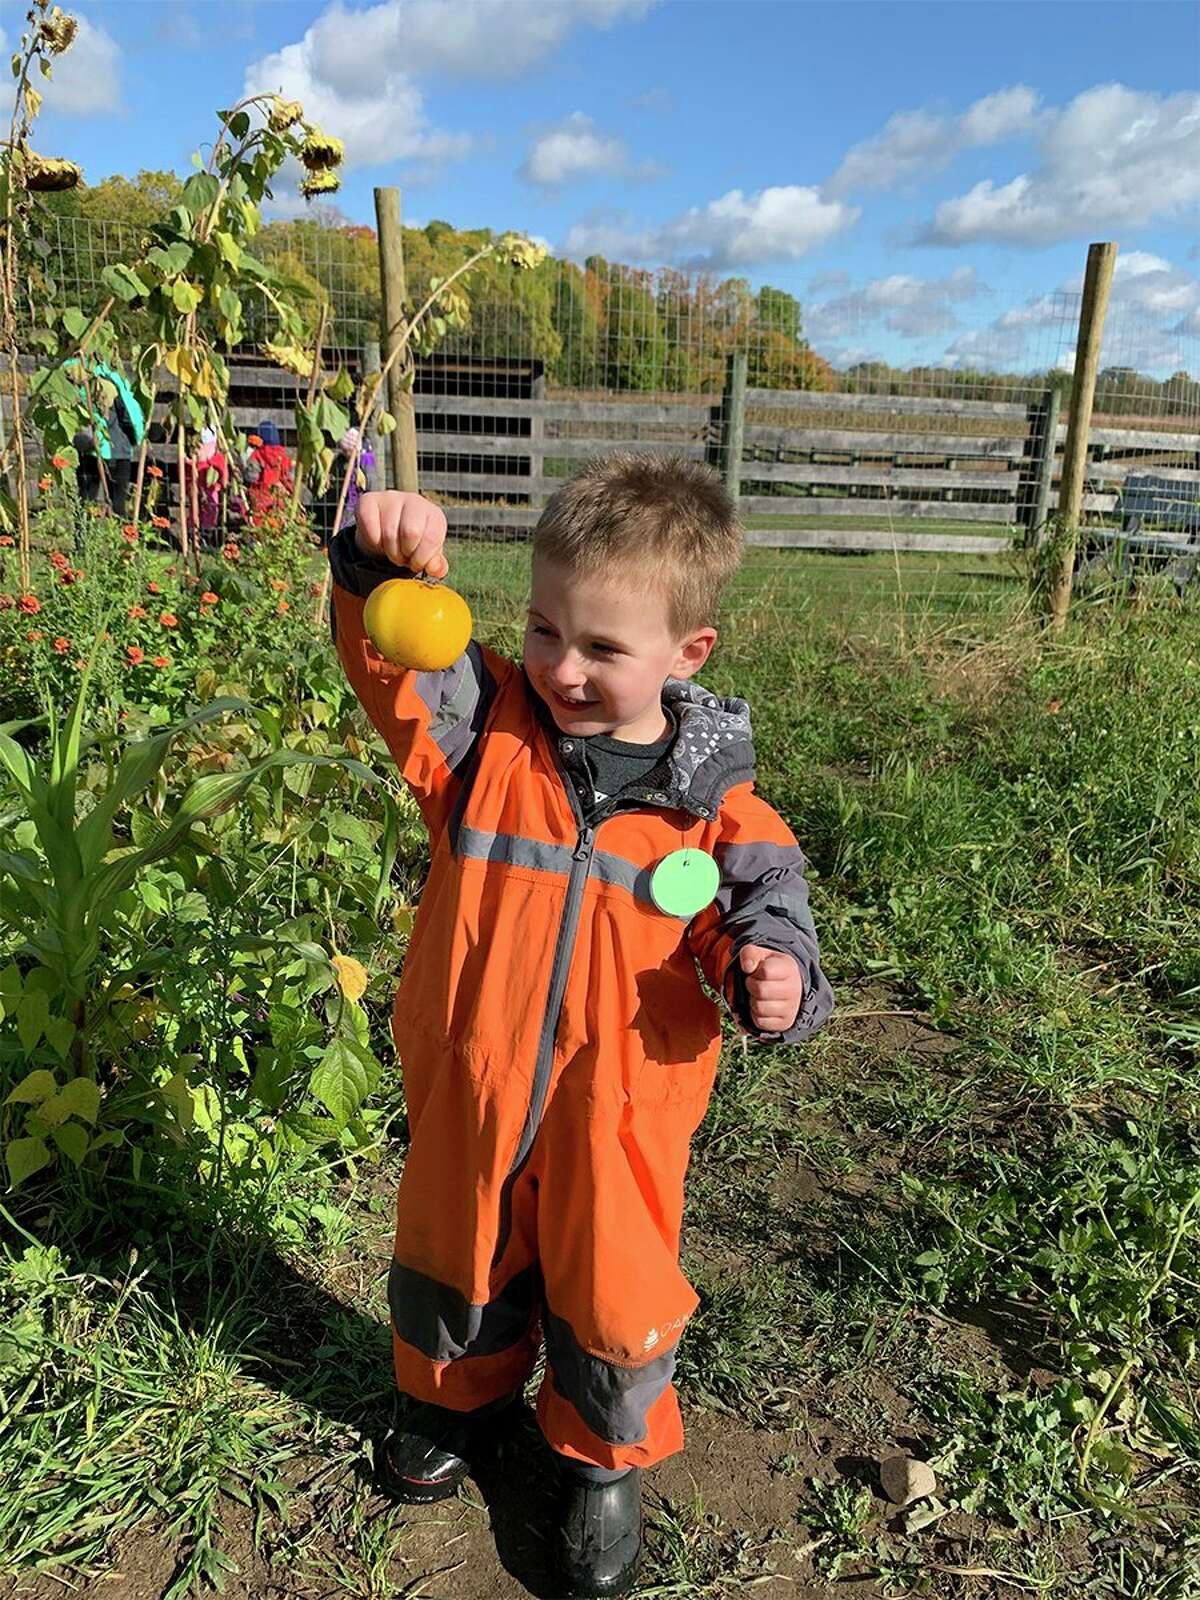 Nature Preschool classes will be held entirely outdoors, and is now accepting registration requests for the 2020-21 school year. (Photo provided)